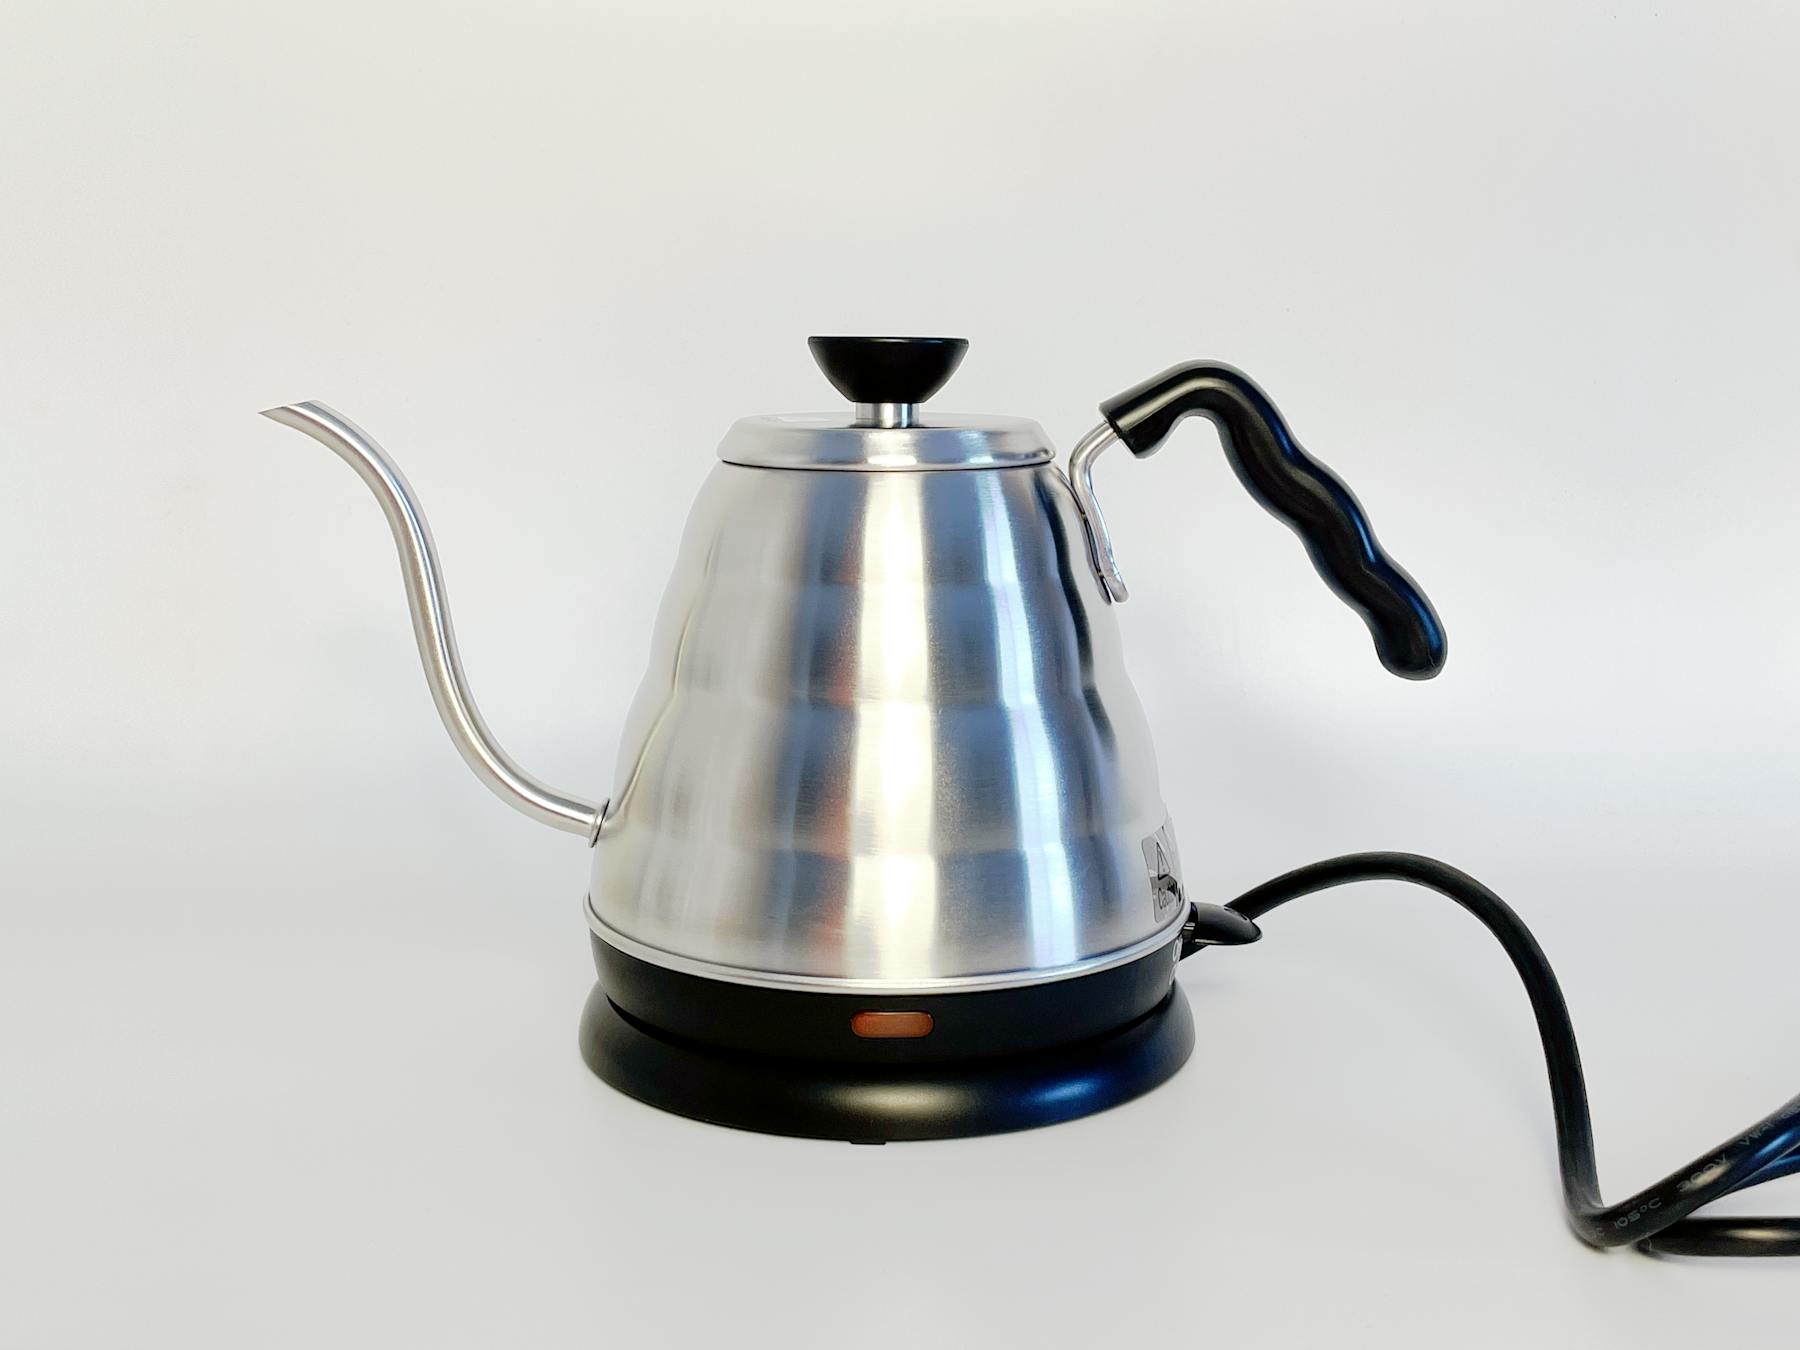 https://dispatch.imgix.net/7oayEoZnXz7mH0Y7AeeAzo/f9cad4a30496e5ee1be8185437fe7410/electtric_kettle.png?auto=format,compress&w=1800&h=1584&fit=crop